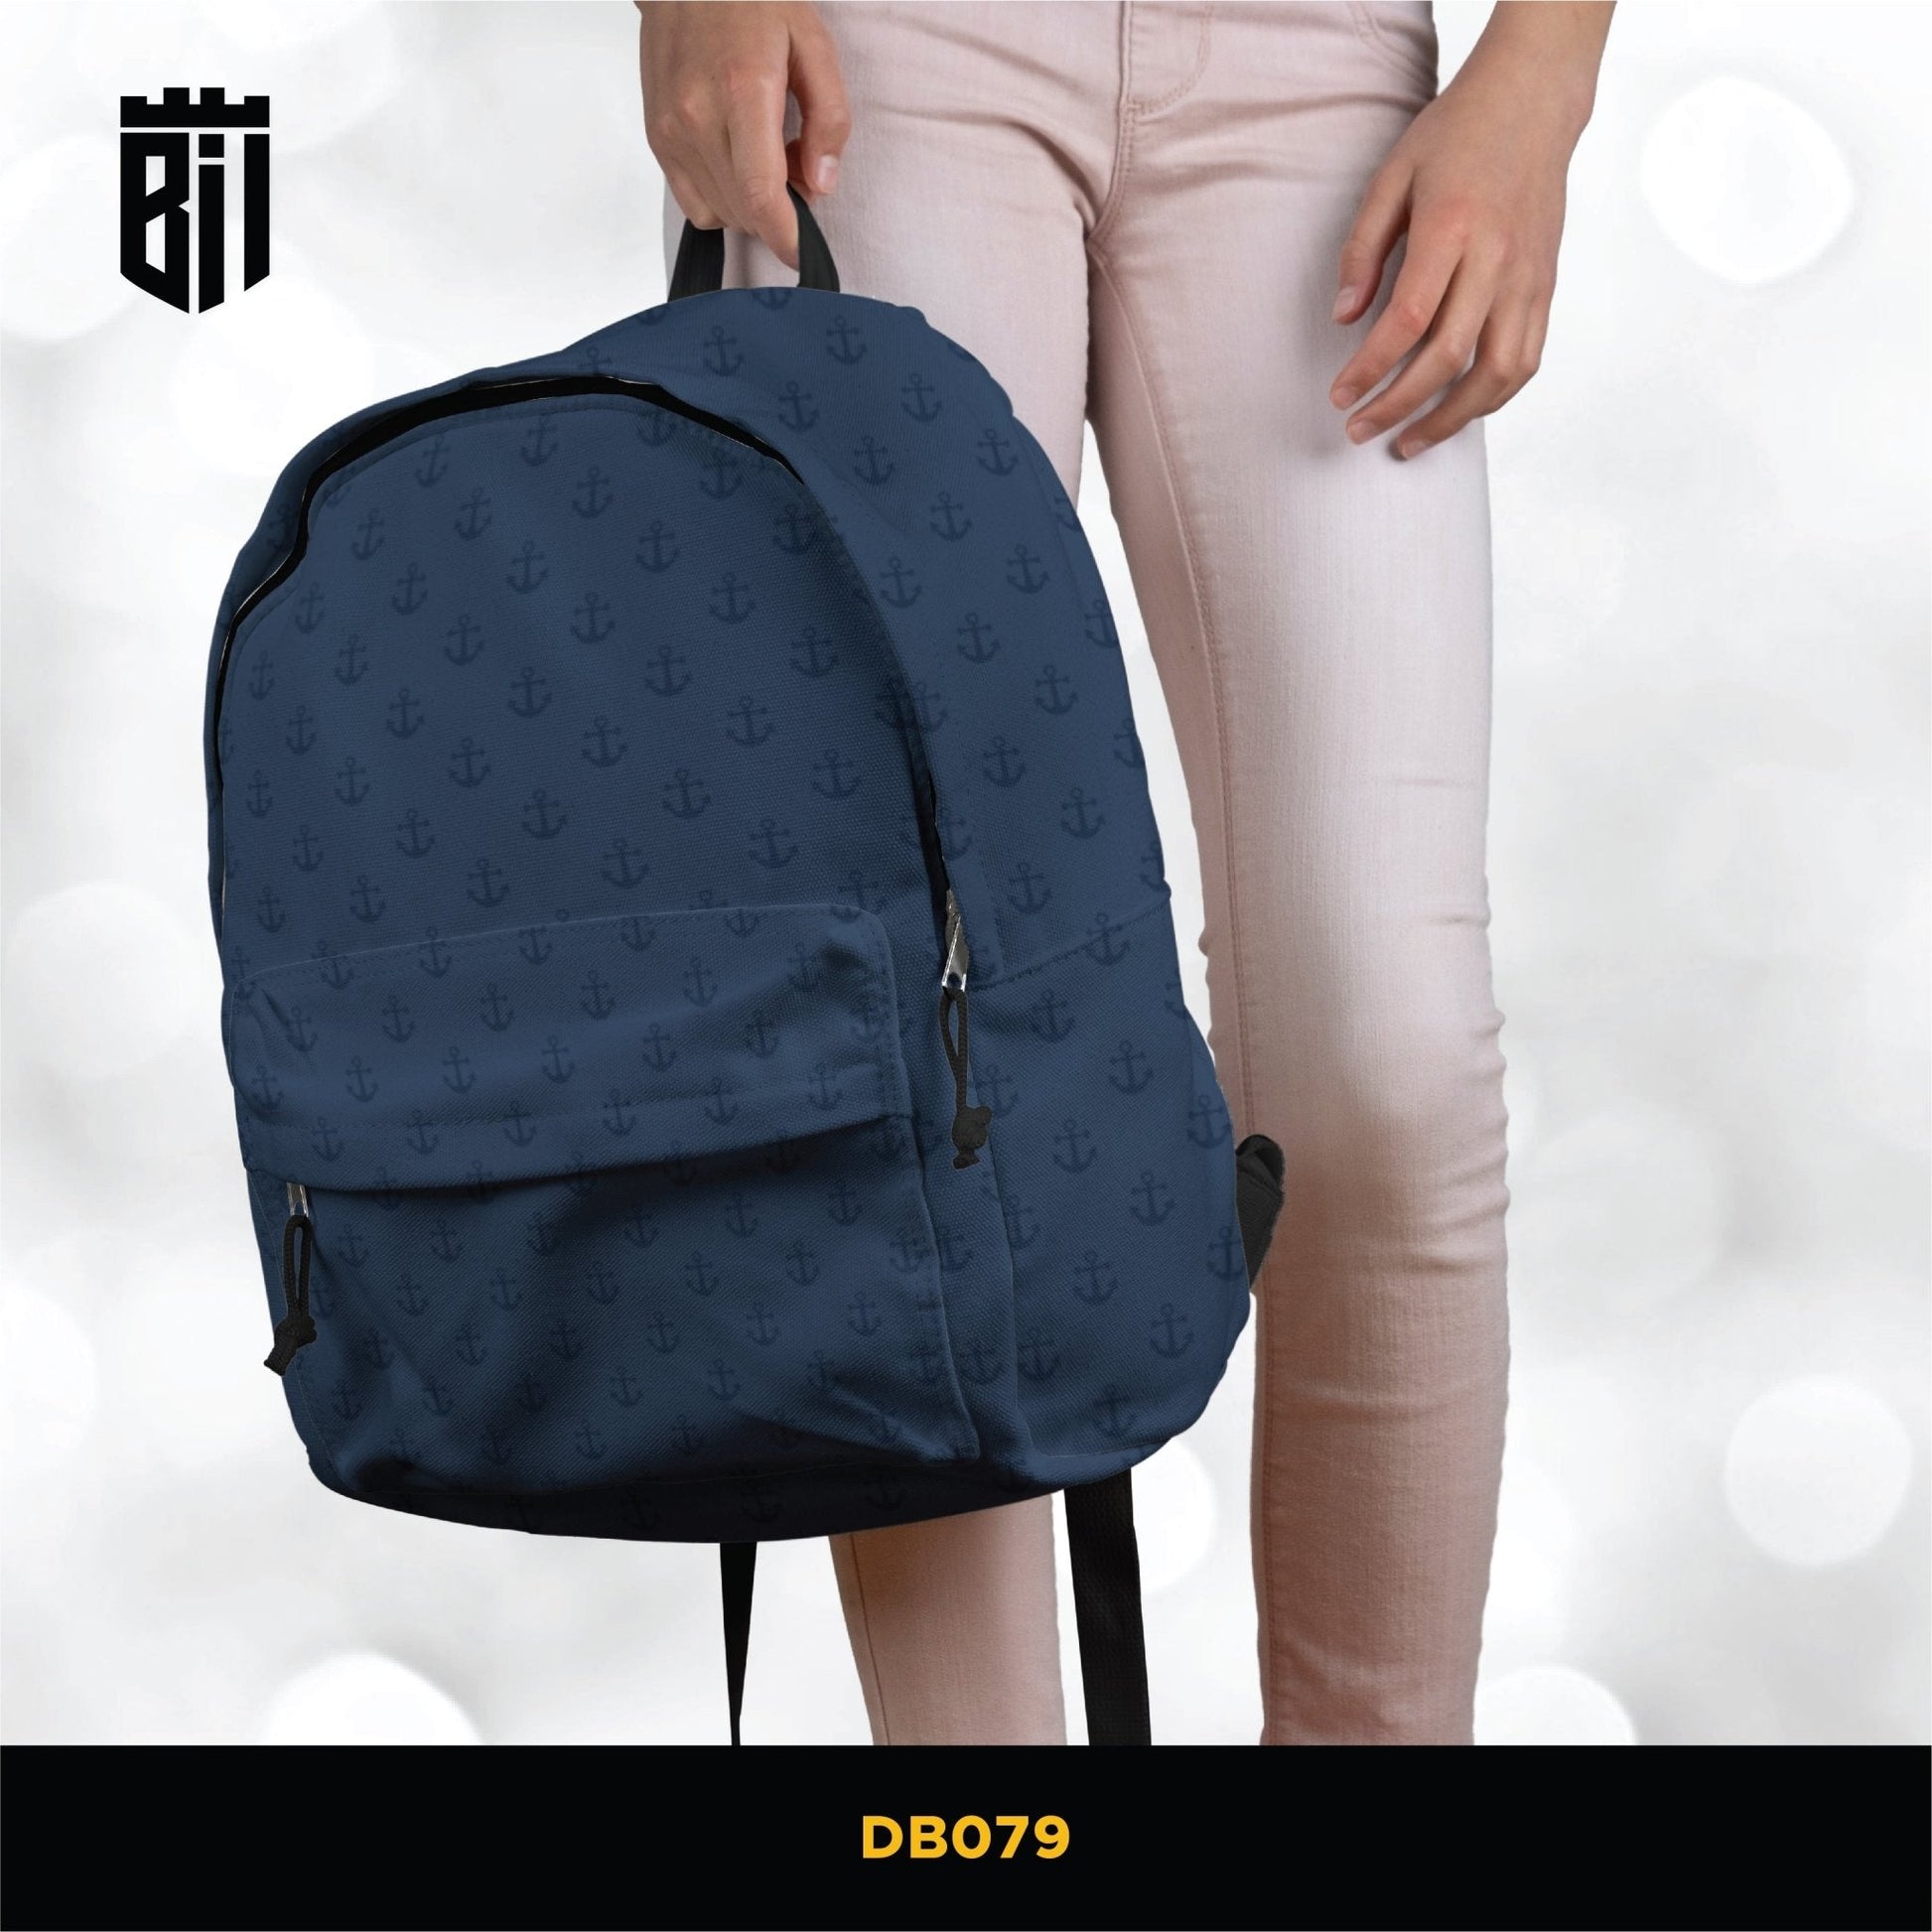 DB079 Blue Anchors Allover Printed Backpack - BREACHIT